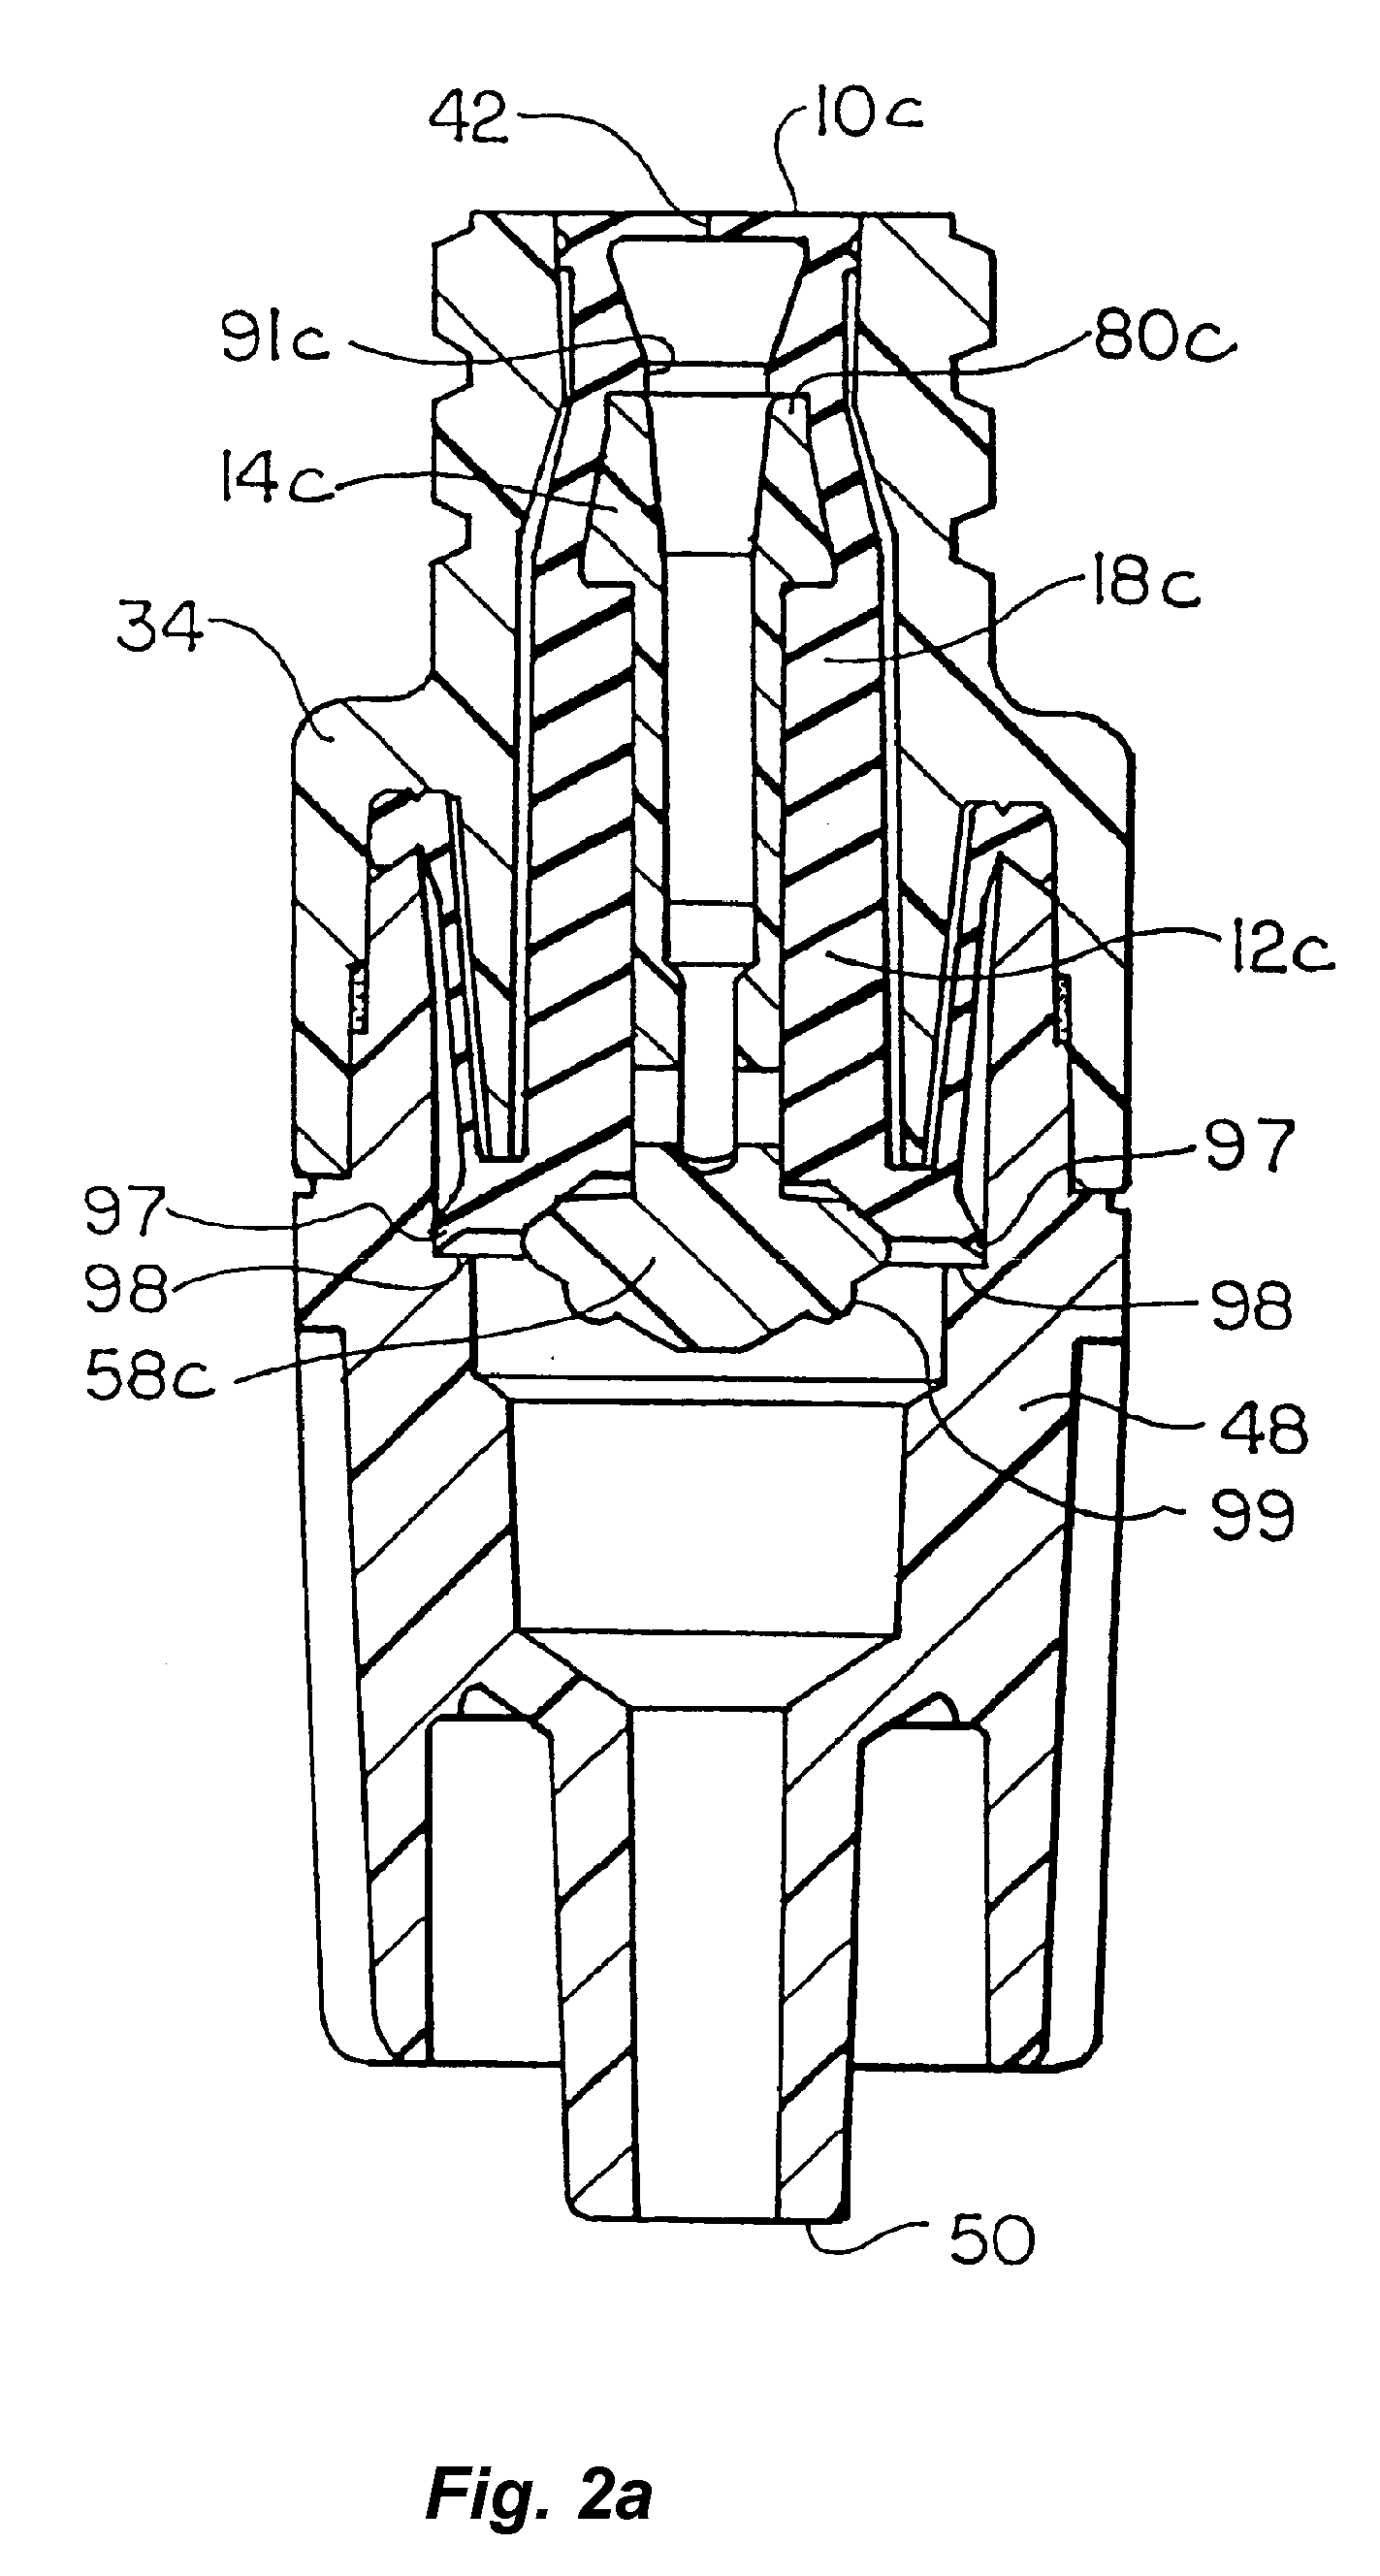 Self-Lubricating Elastomeric Components for Use in Medical Devices